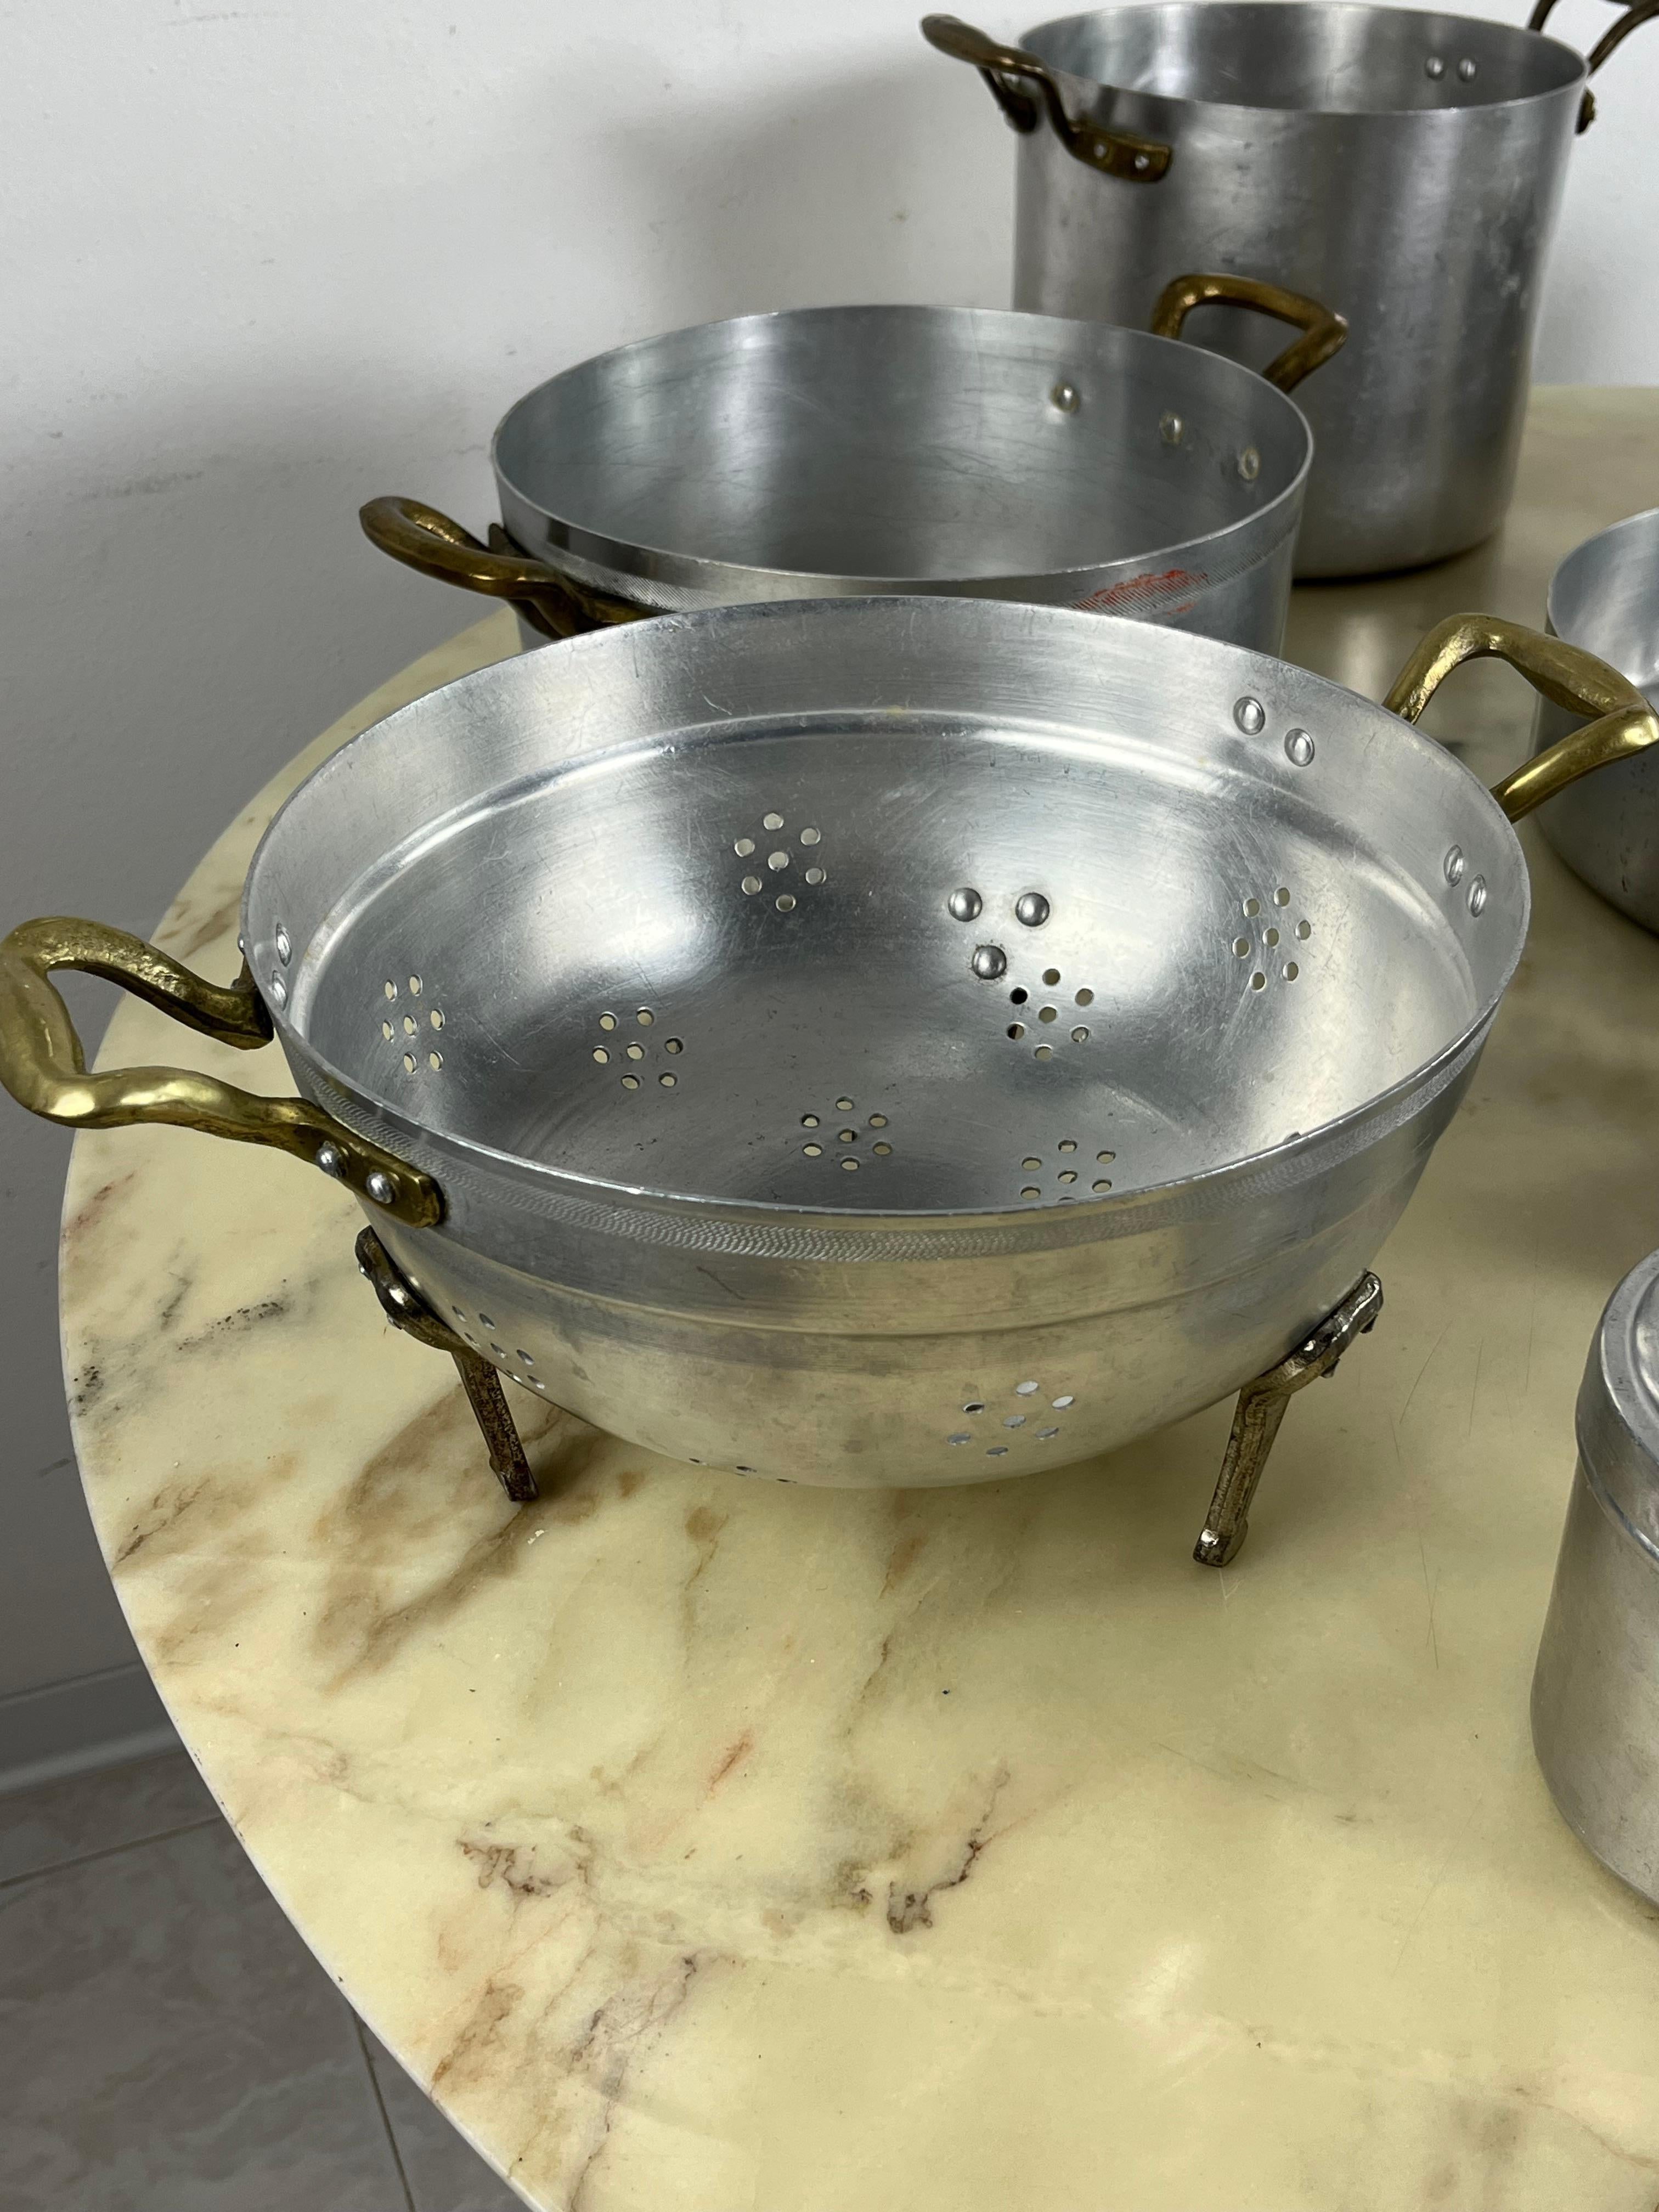 Set of 11 Mid-Century aluminum and copper 1930s cookware
Found in an ancient country house in the Sicilian hinterland.
The set consists of 1 pan with a diameter of 26 cm, 3 saucepans (diameter from 23 to 26 cm), 1 baking tray with a diameter of 28